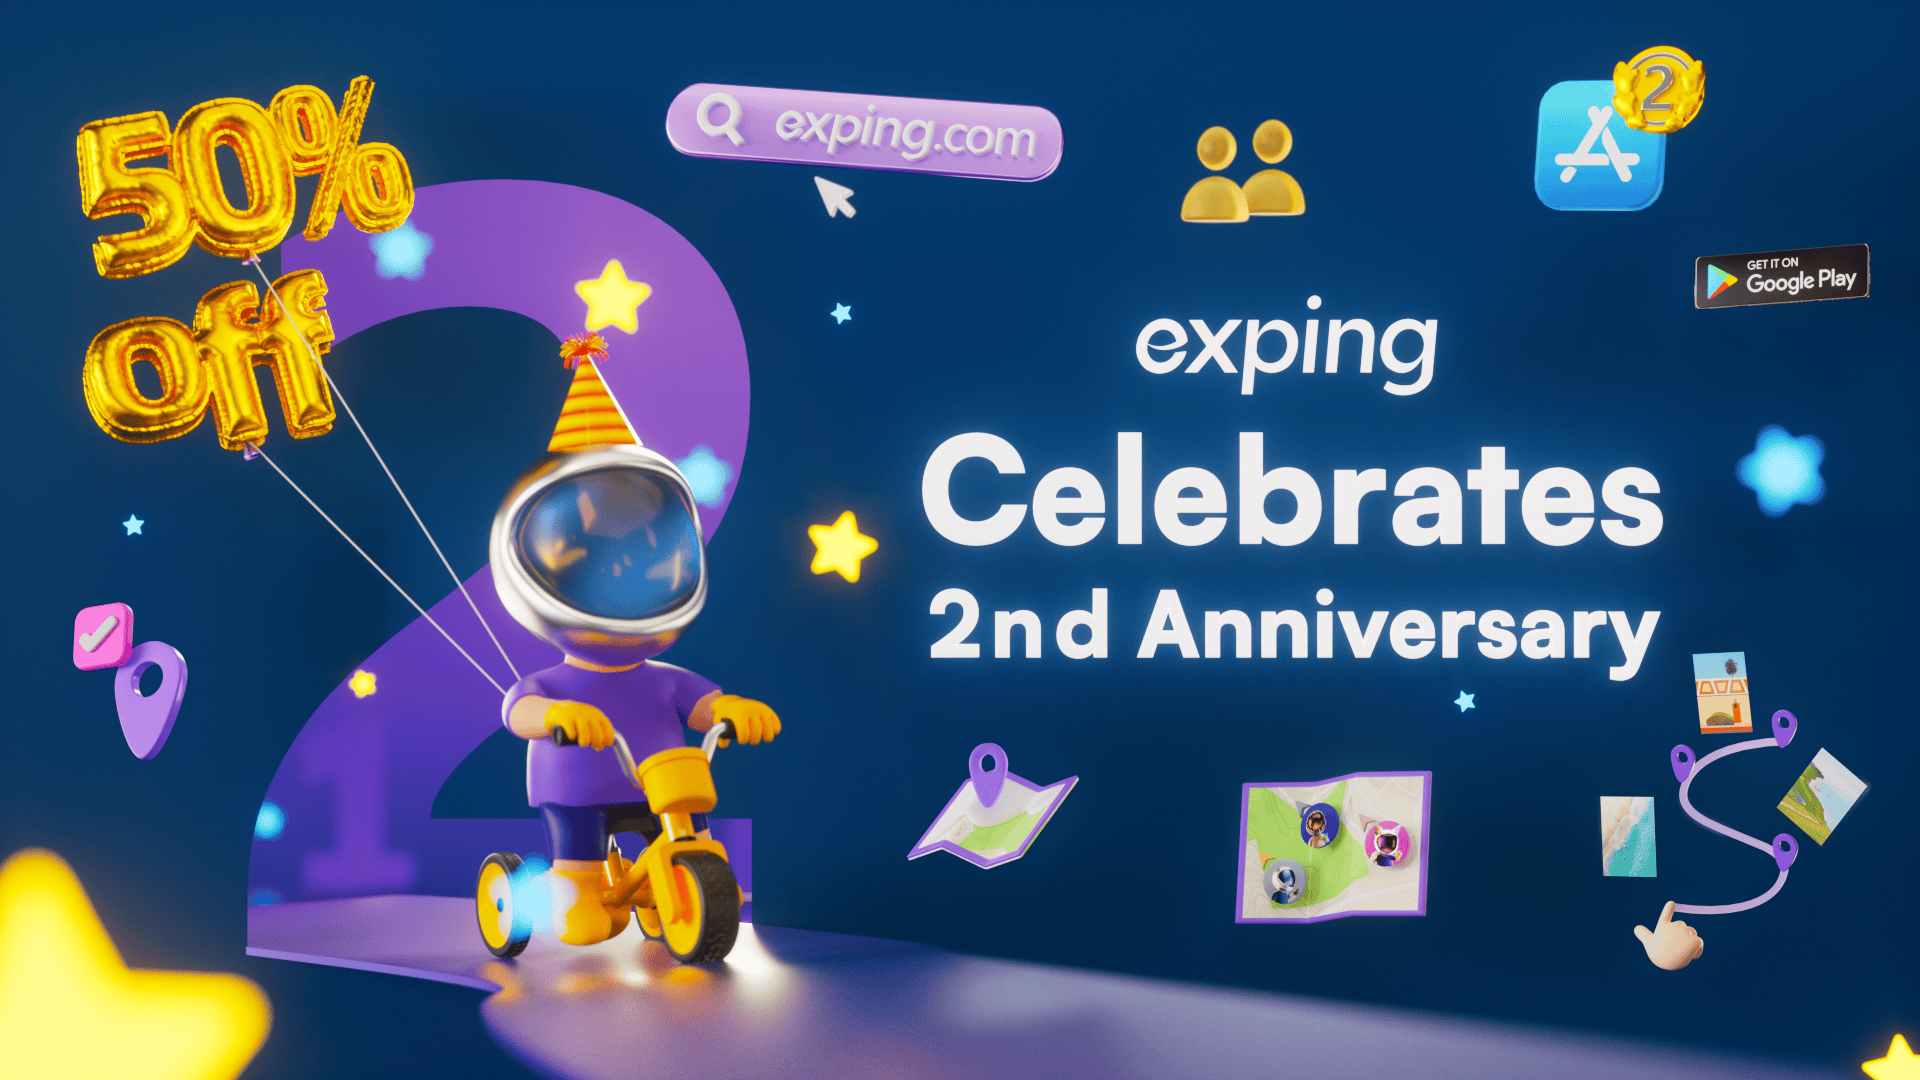 exping’s 2nd Anniversary: Explore, Experience, Express with Map